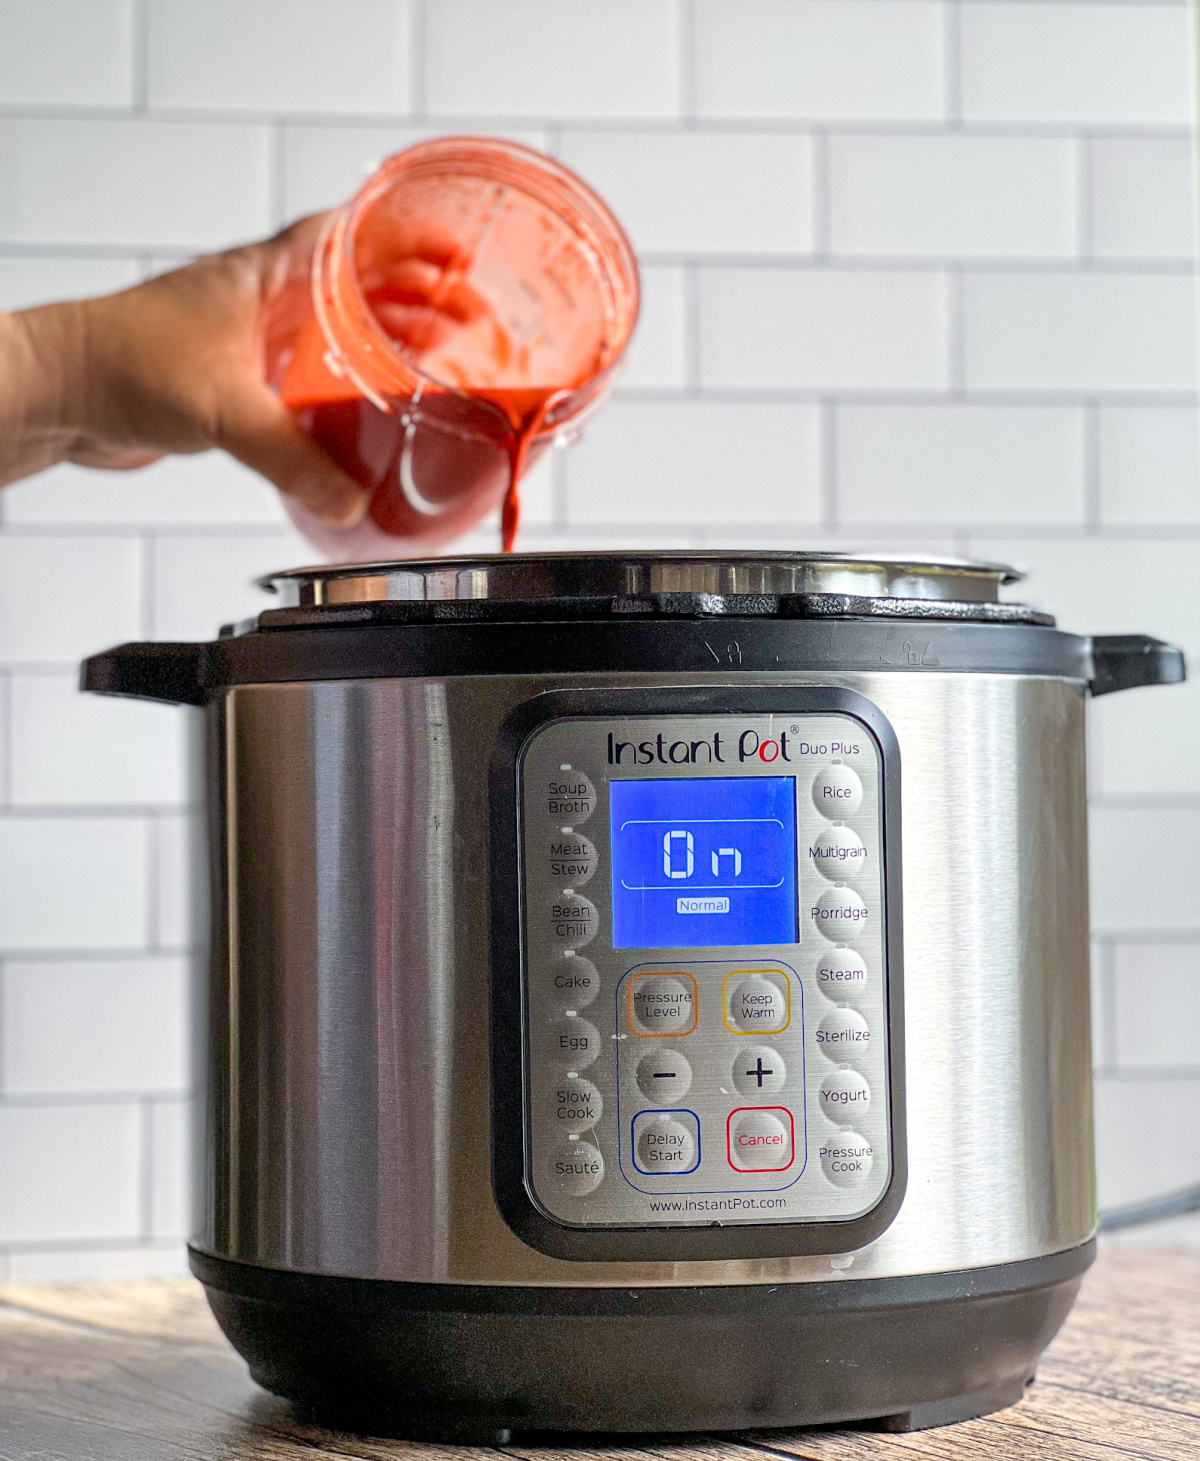 Pouring the achiote sauce into the instant pot